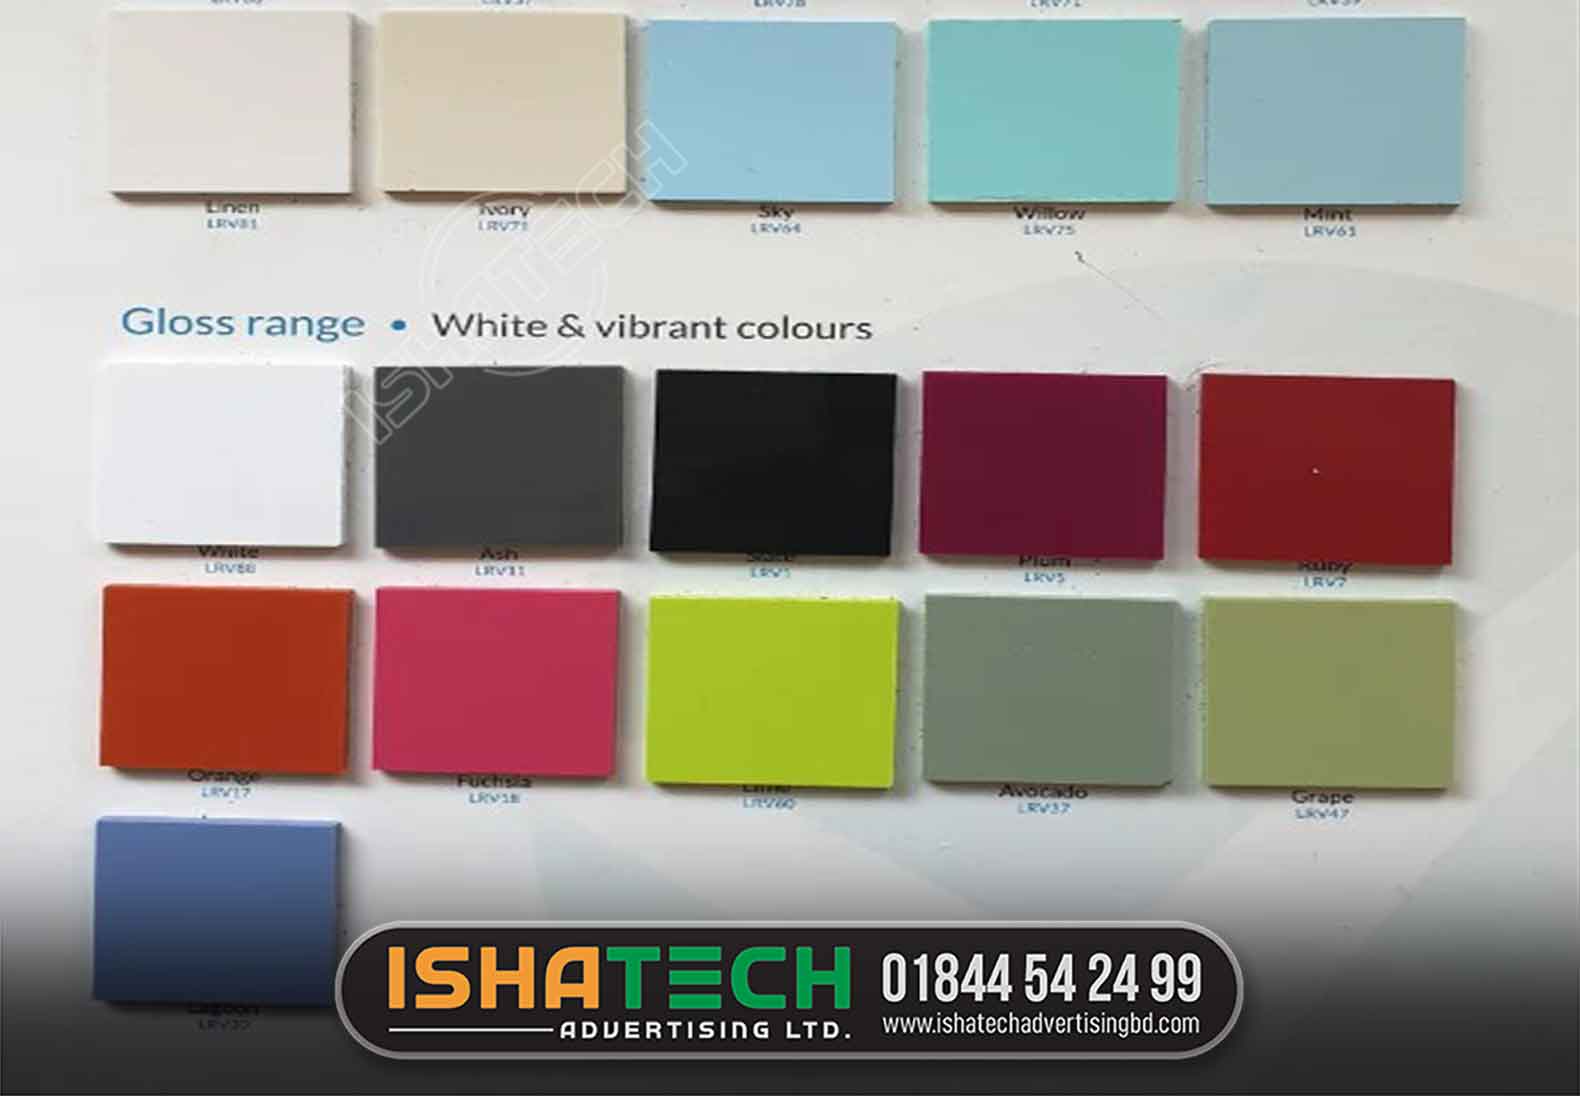 Solid Surface Sheet Wholesale Trader of a wide range of products which include Samsung acrylic solid surface, Corian Acrylic Solid Surface Sheet, Tiara solid surface, Solid Surfaces Korean, Korean Solid Surfaces and Durlax Acrylic Solid Surface Sheet.